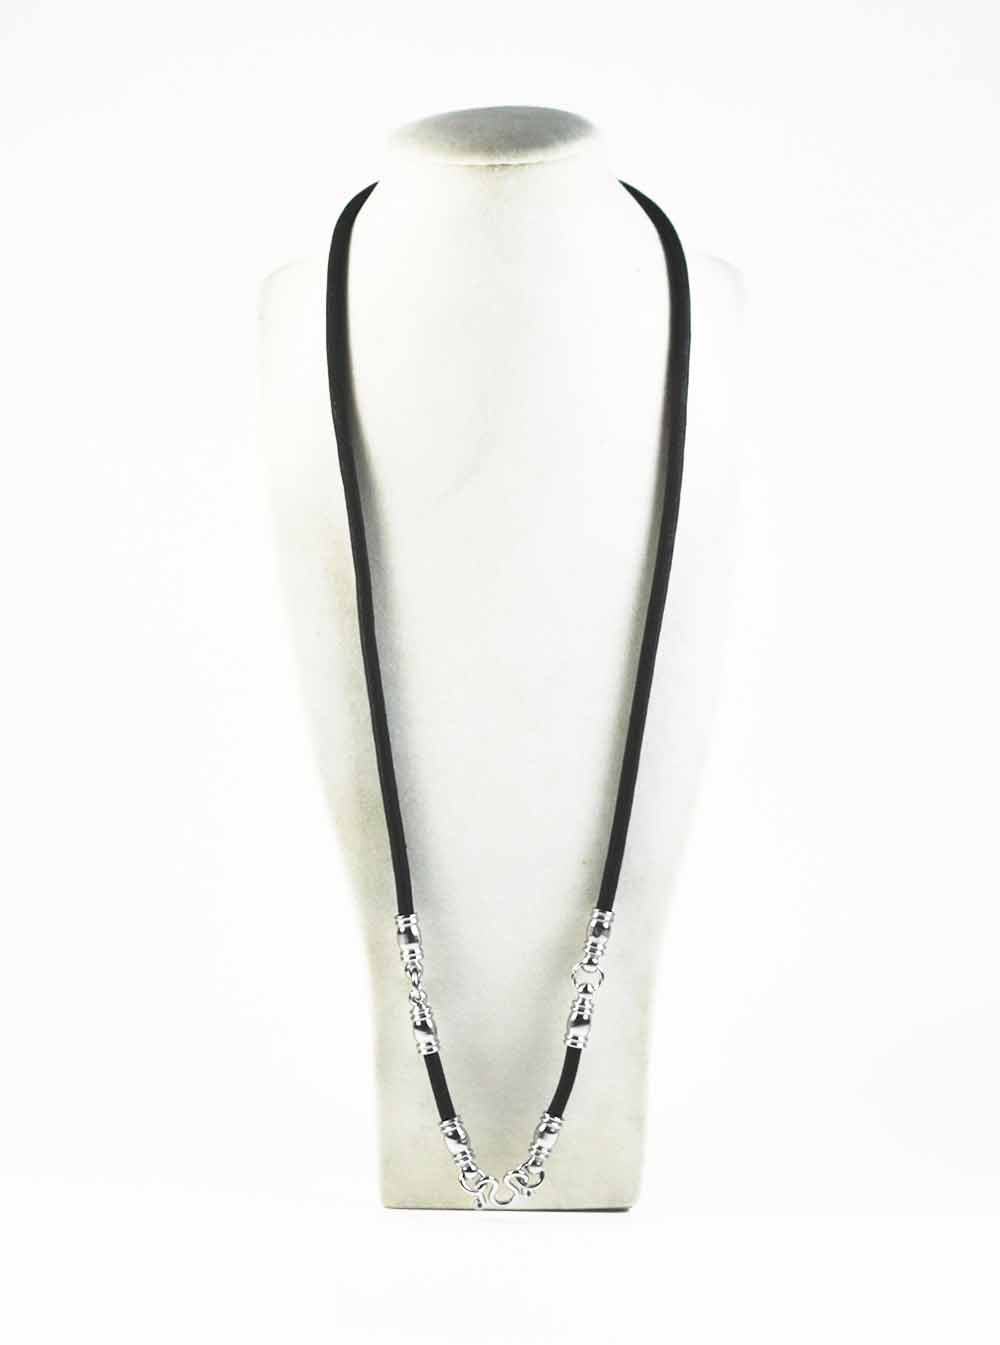 Black Nylon String Three + One Hooks Amulet Necklace in Silver (66cm)